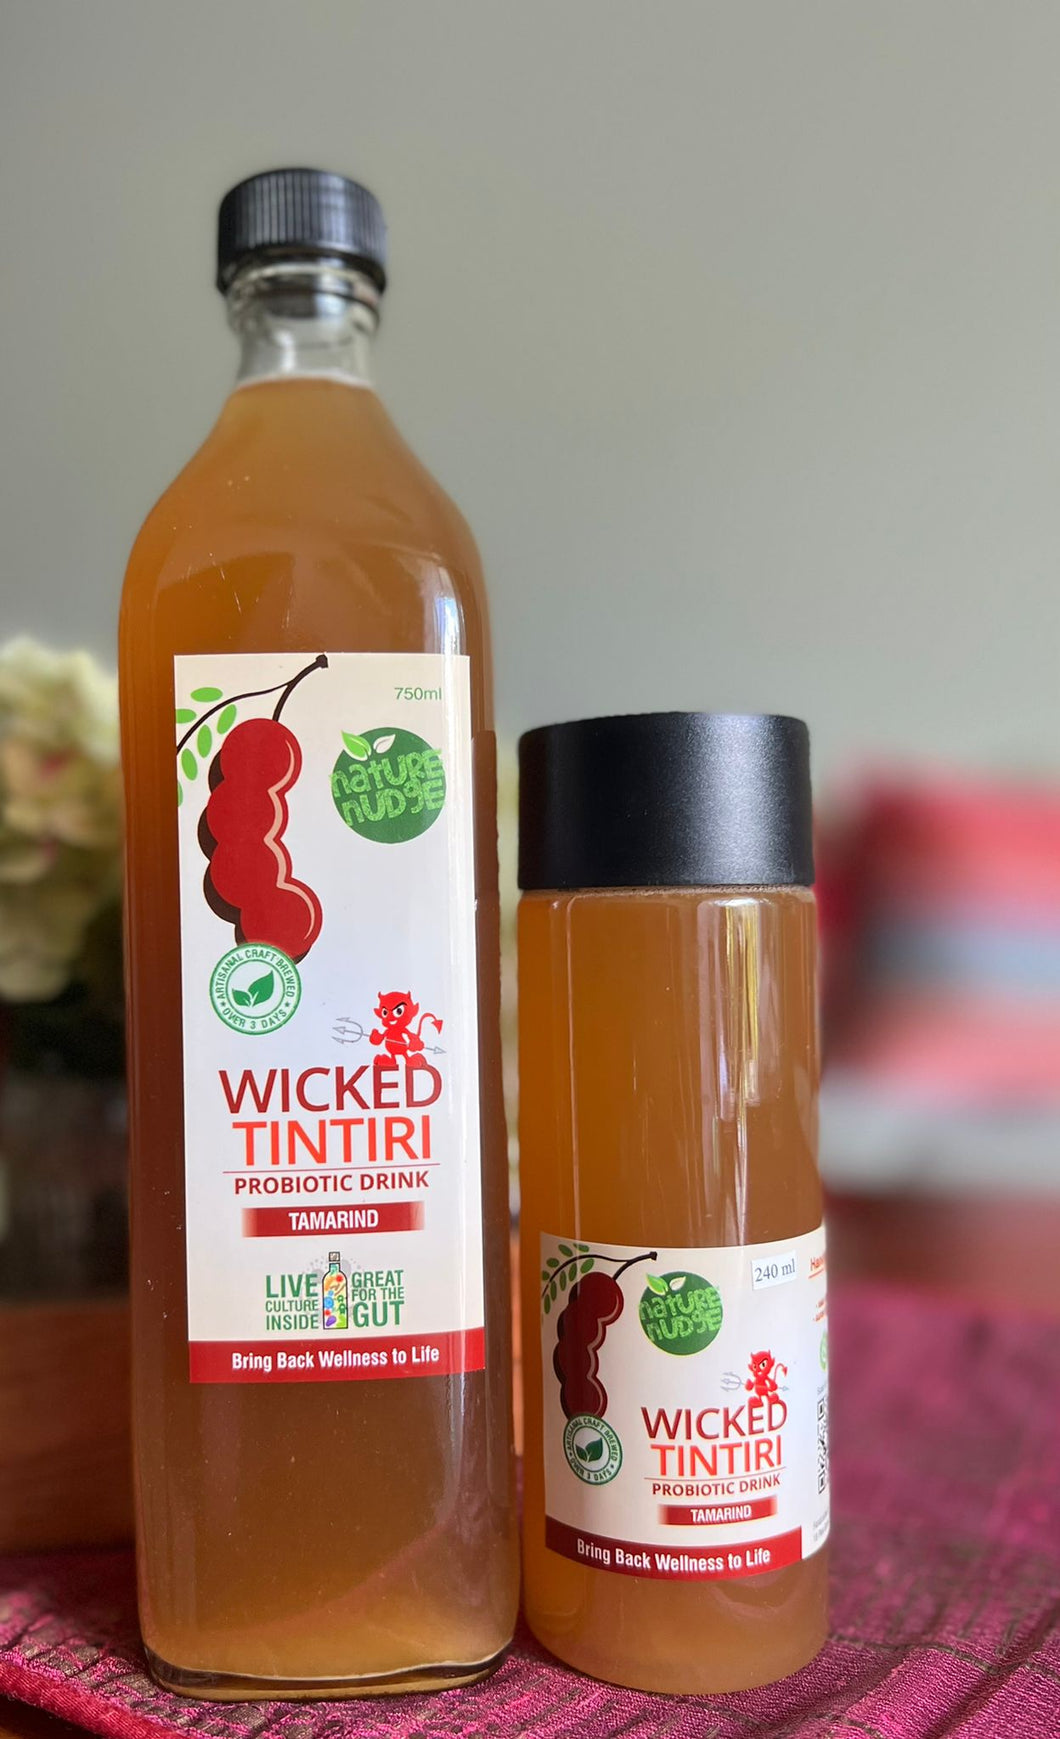 Wicked Tintiri- Tamarind and Ginger based Drink